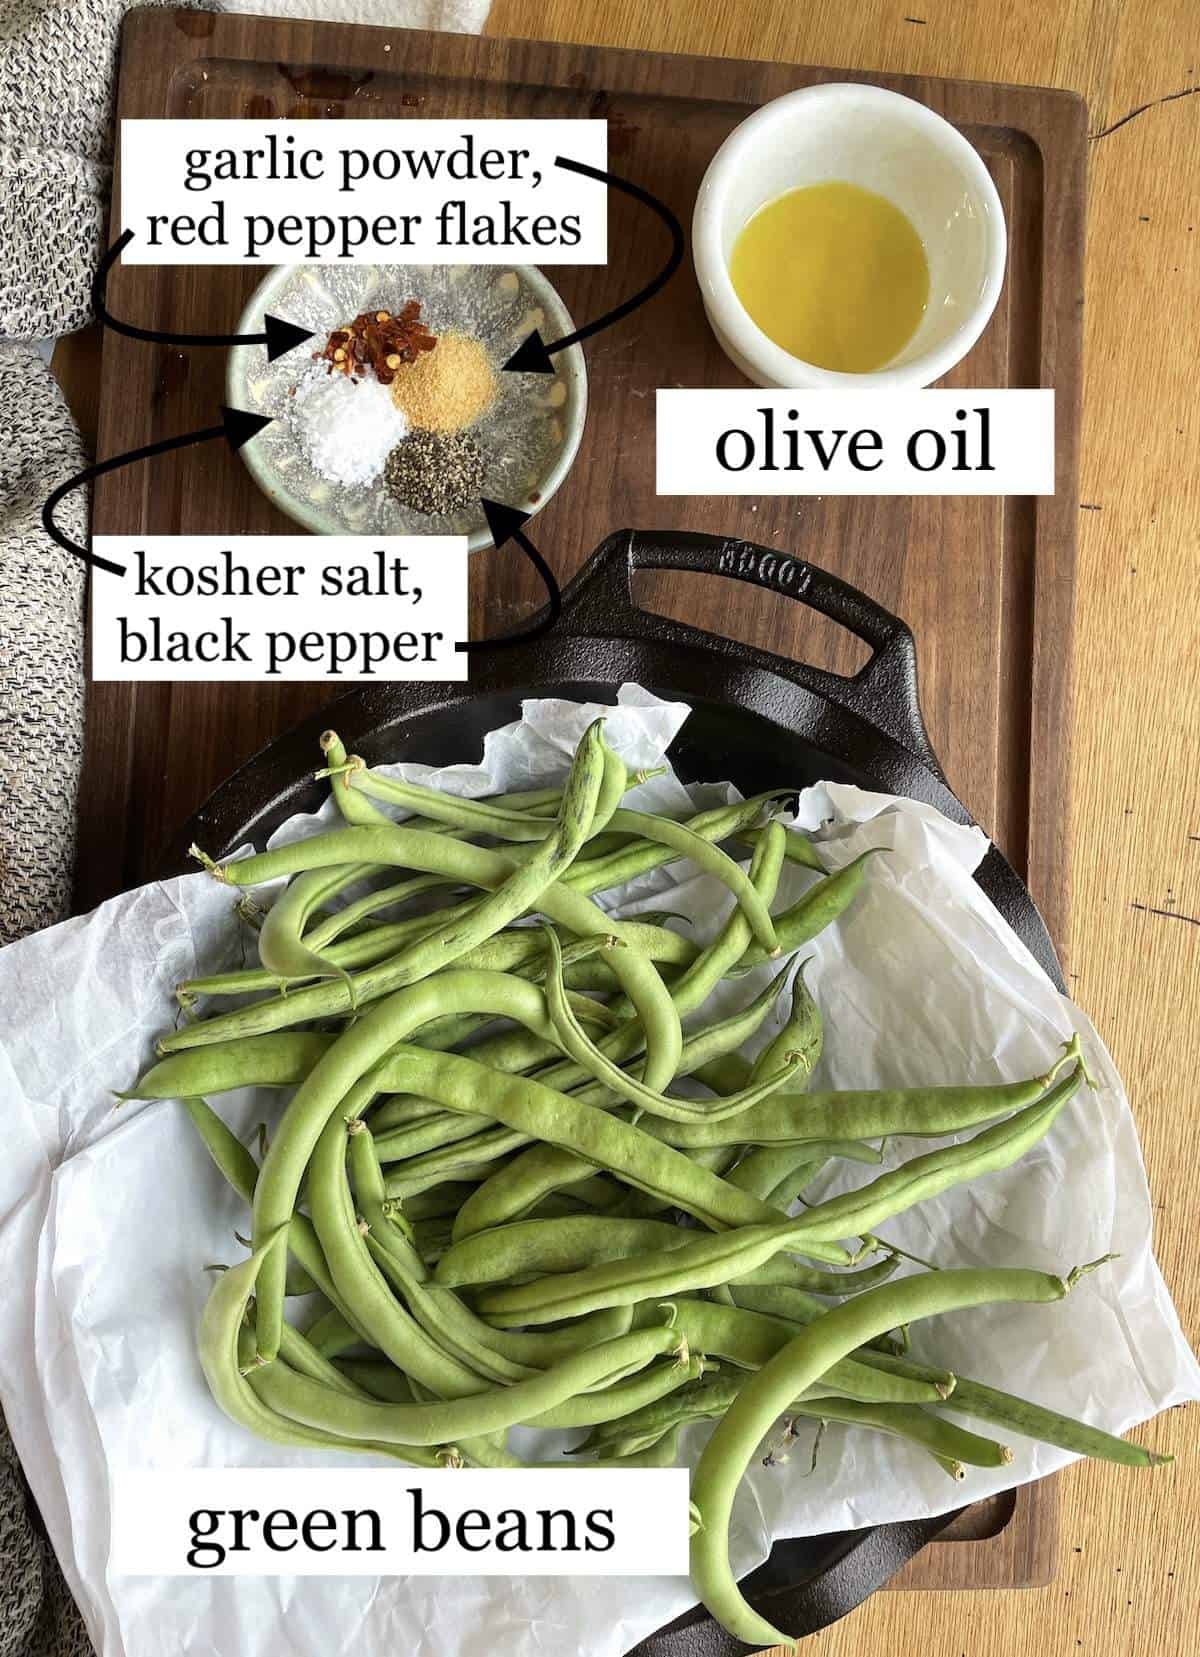 Ingredients needed to make air fryer green beans laid out and labeled - oil, spices, & green beans.